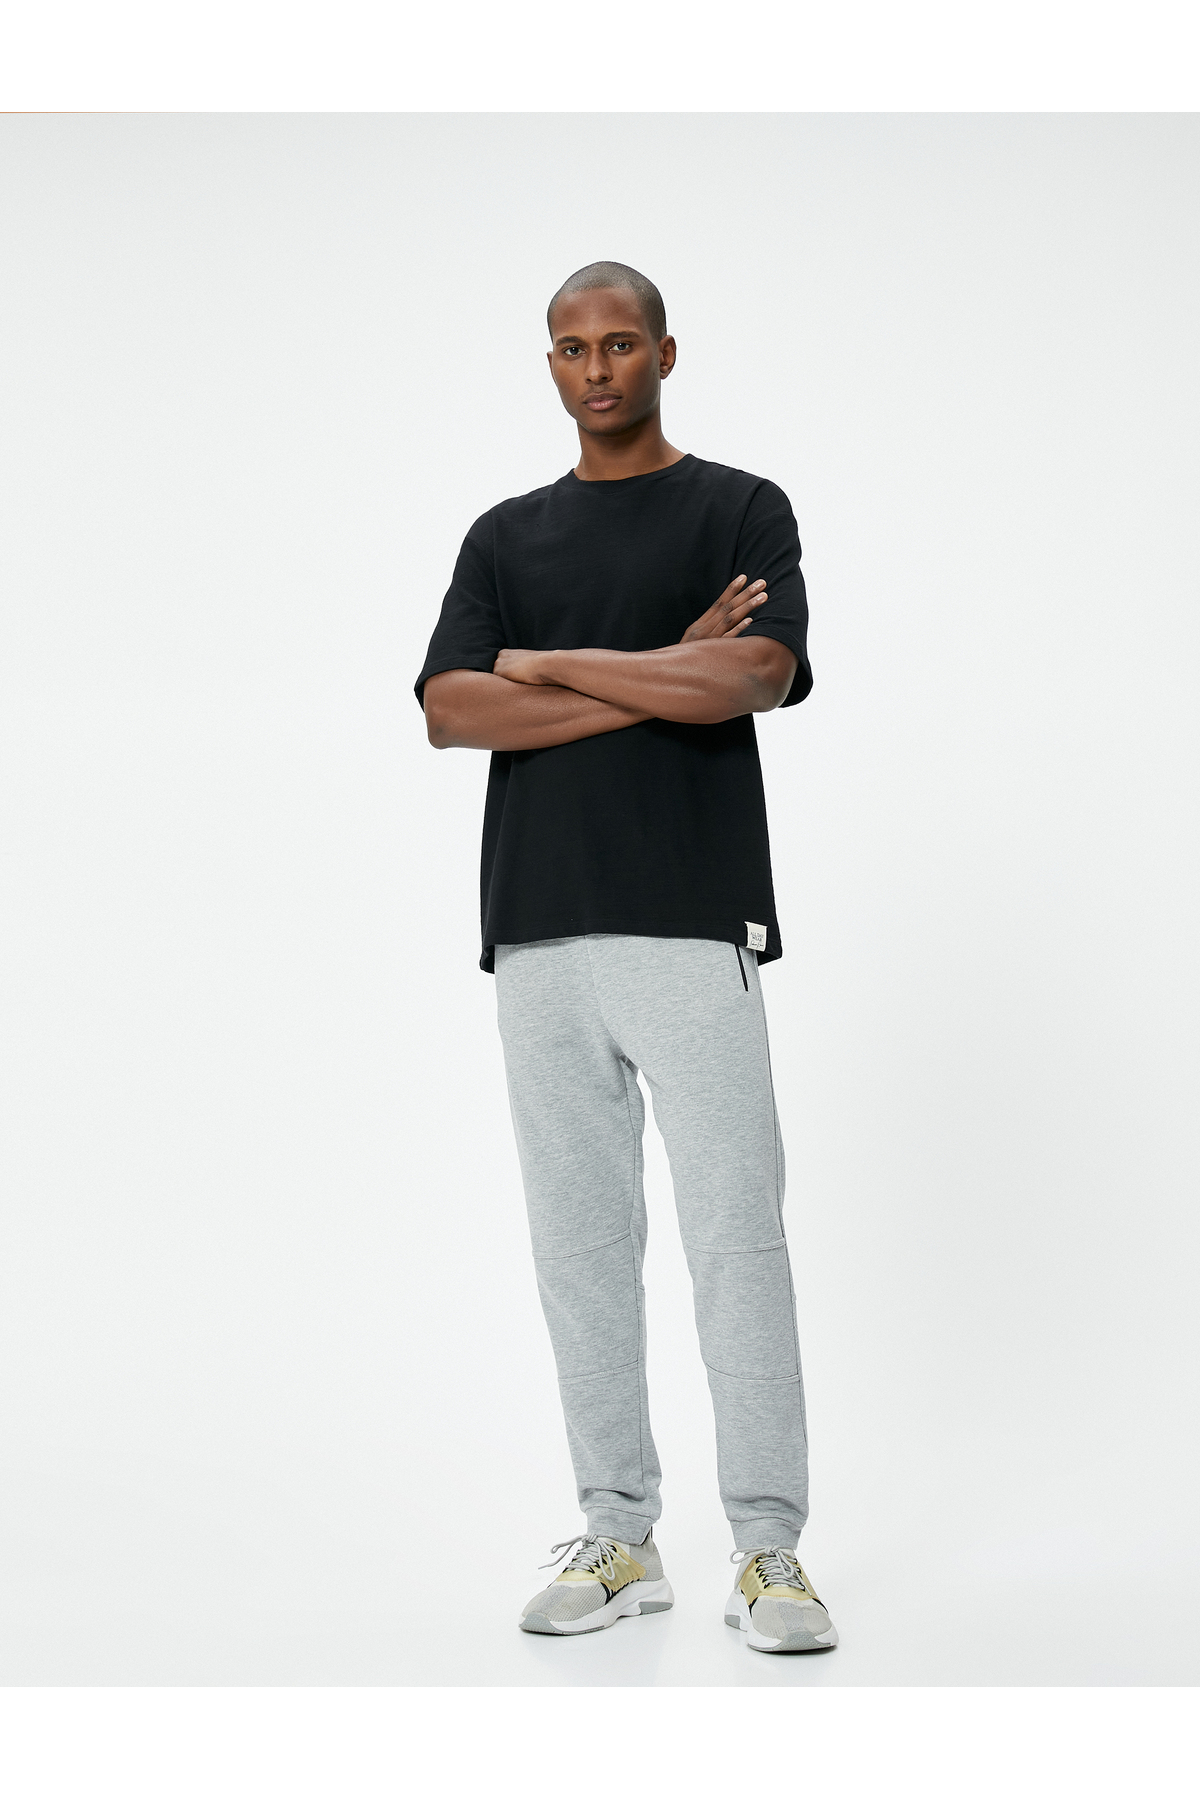 Koton Jogger Sweatpants with Lace Waist Stitching Detail and Zipper Pocket